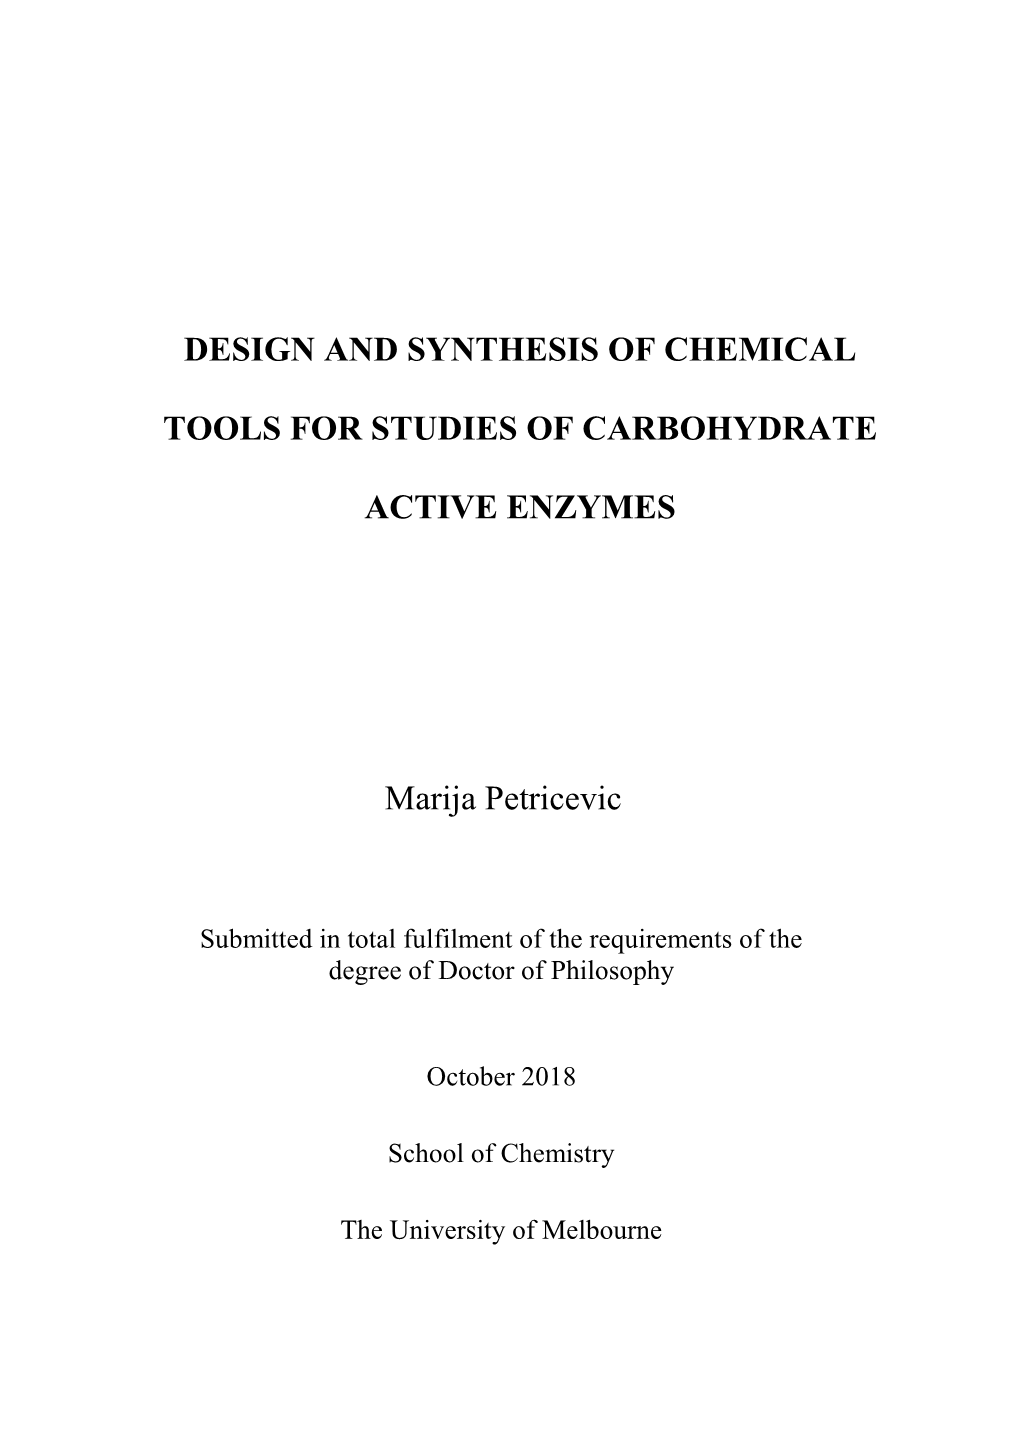 Design and Synthesis of Chemical Tools for Studies of Carbohydrate Active Enzymes